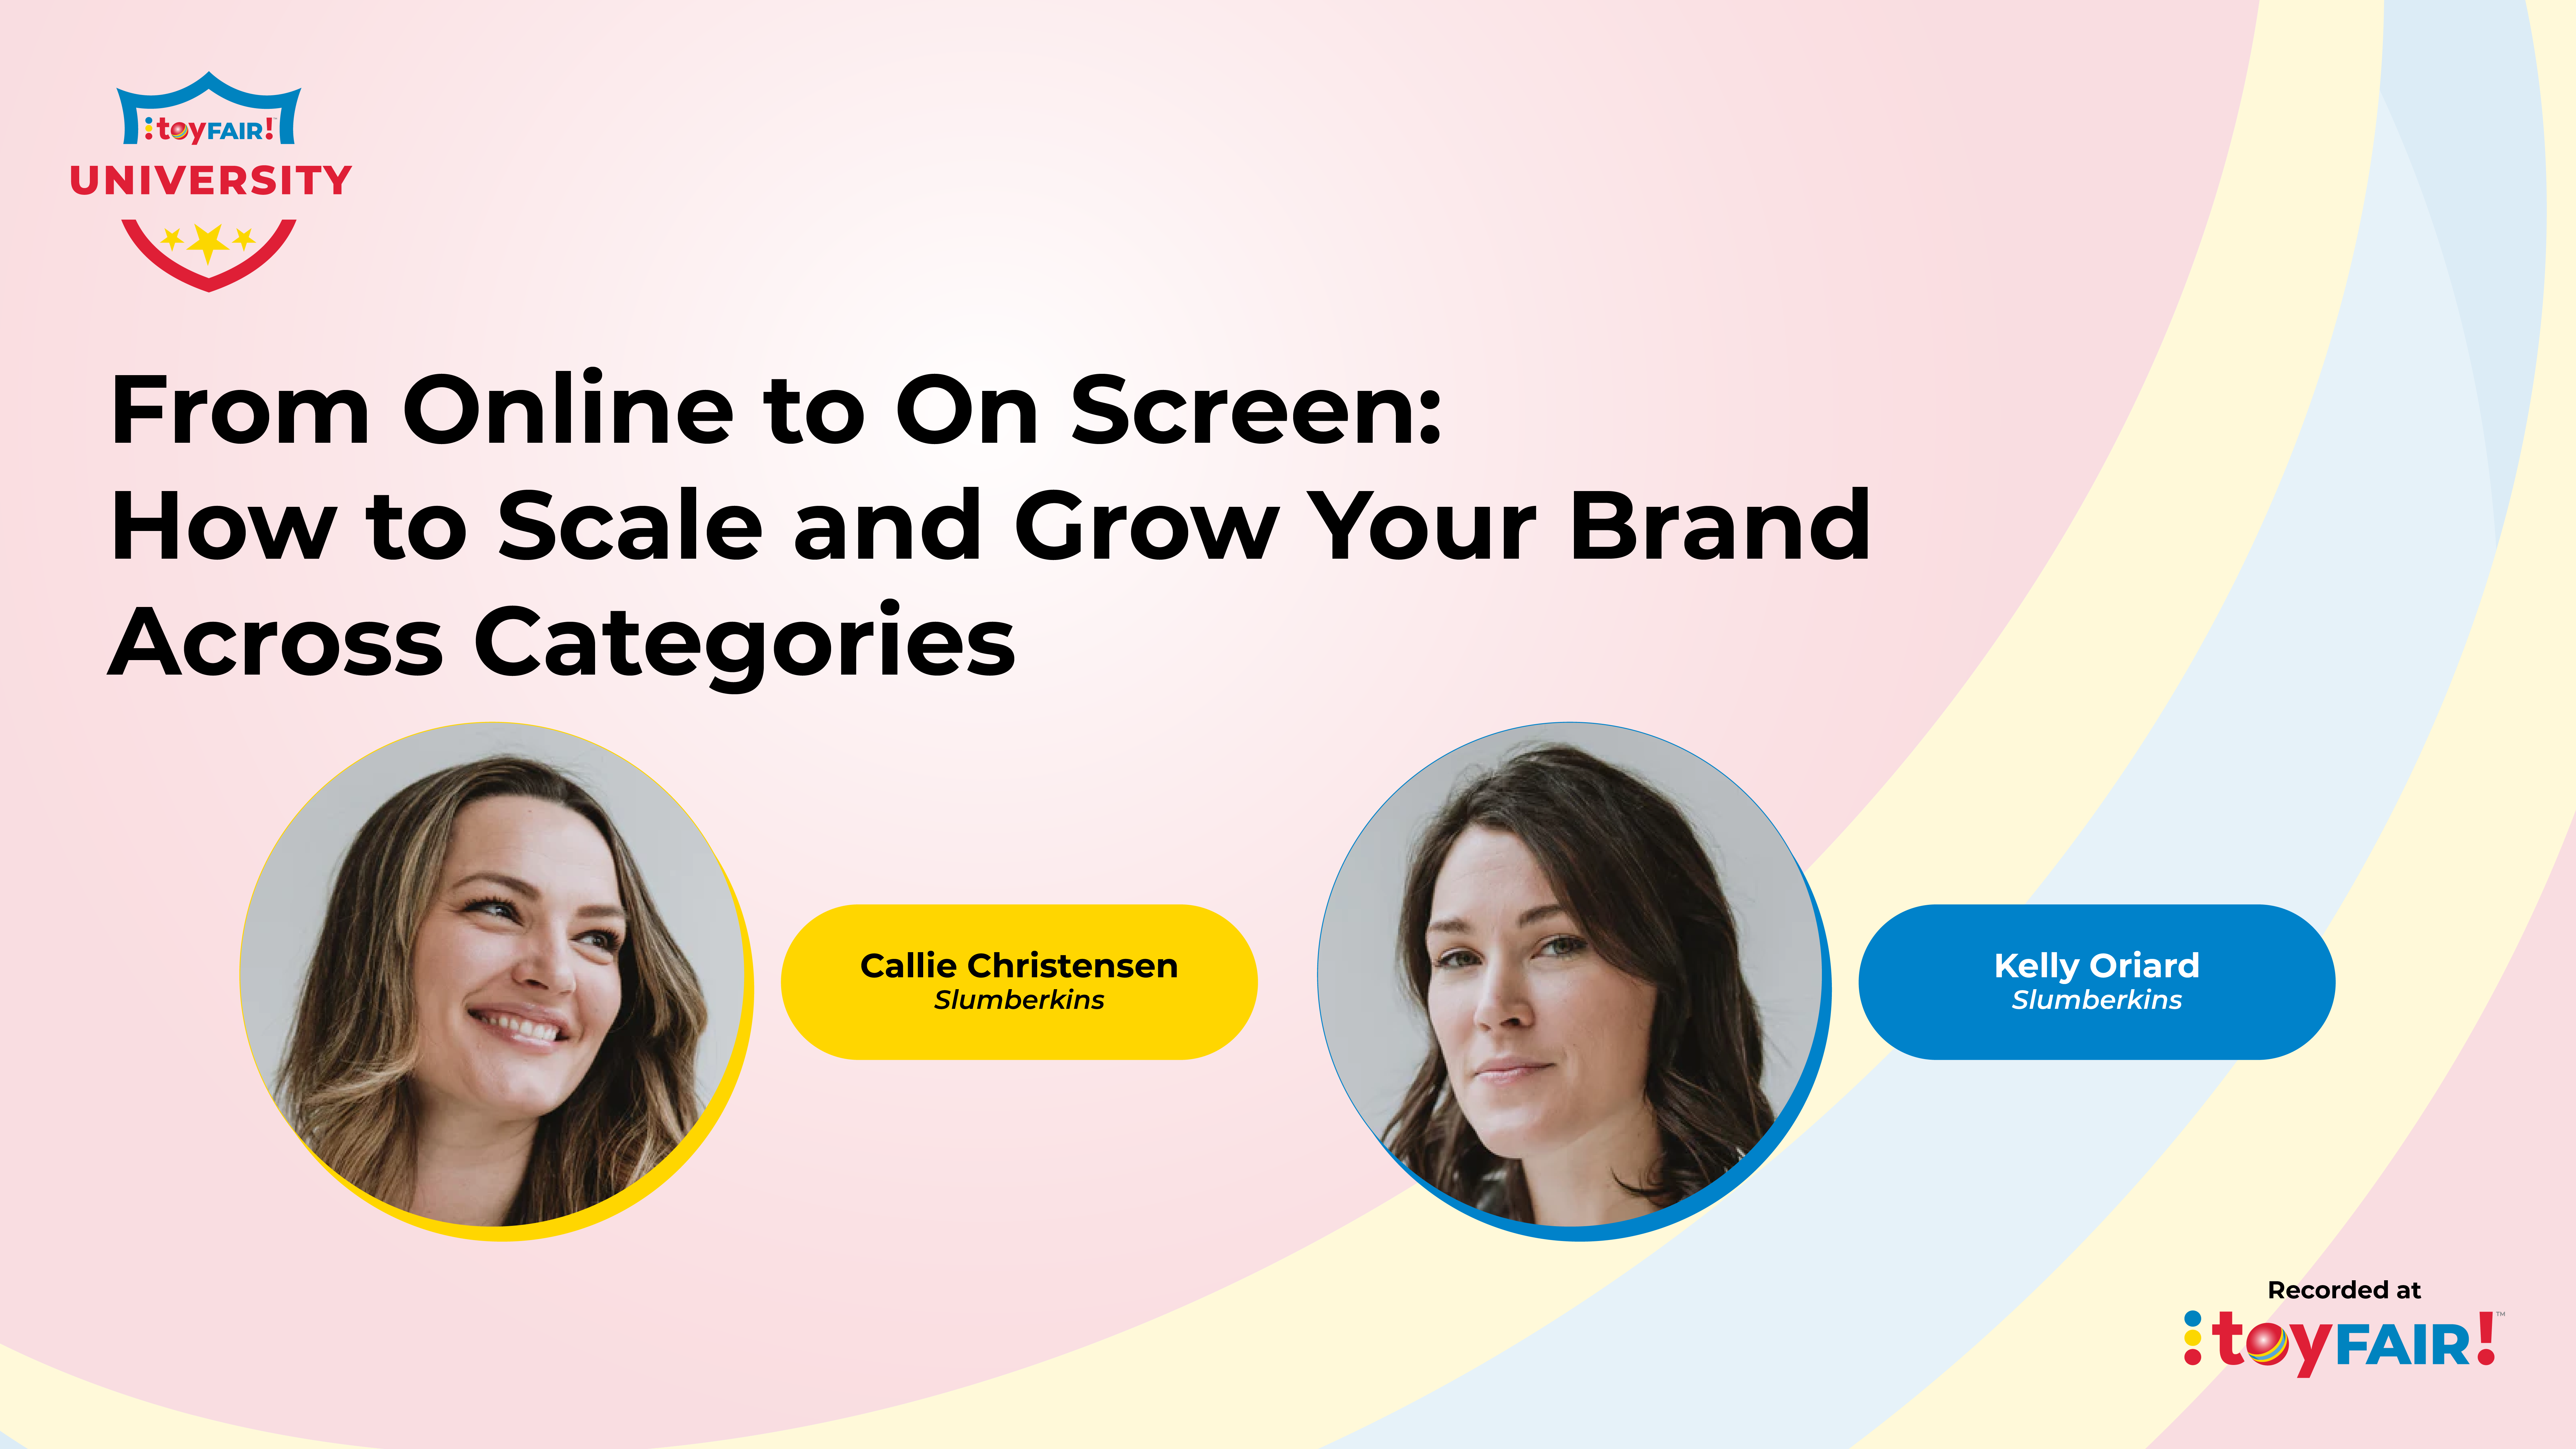 From Online to On Screen: How to Scale and Grow Your Brand Across Categories